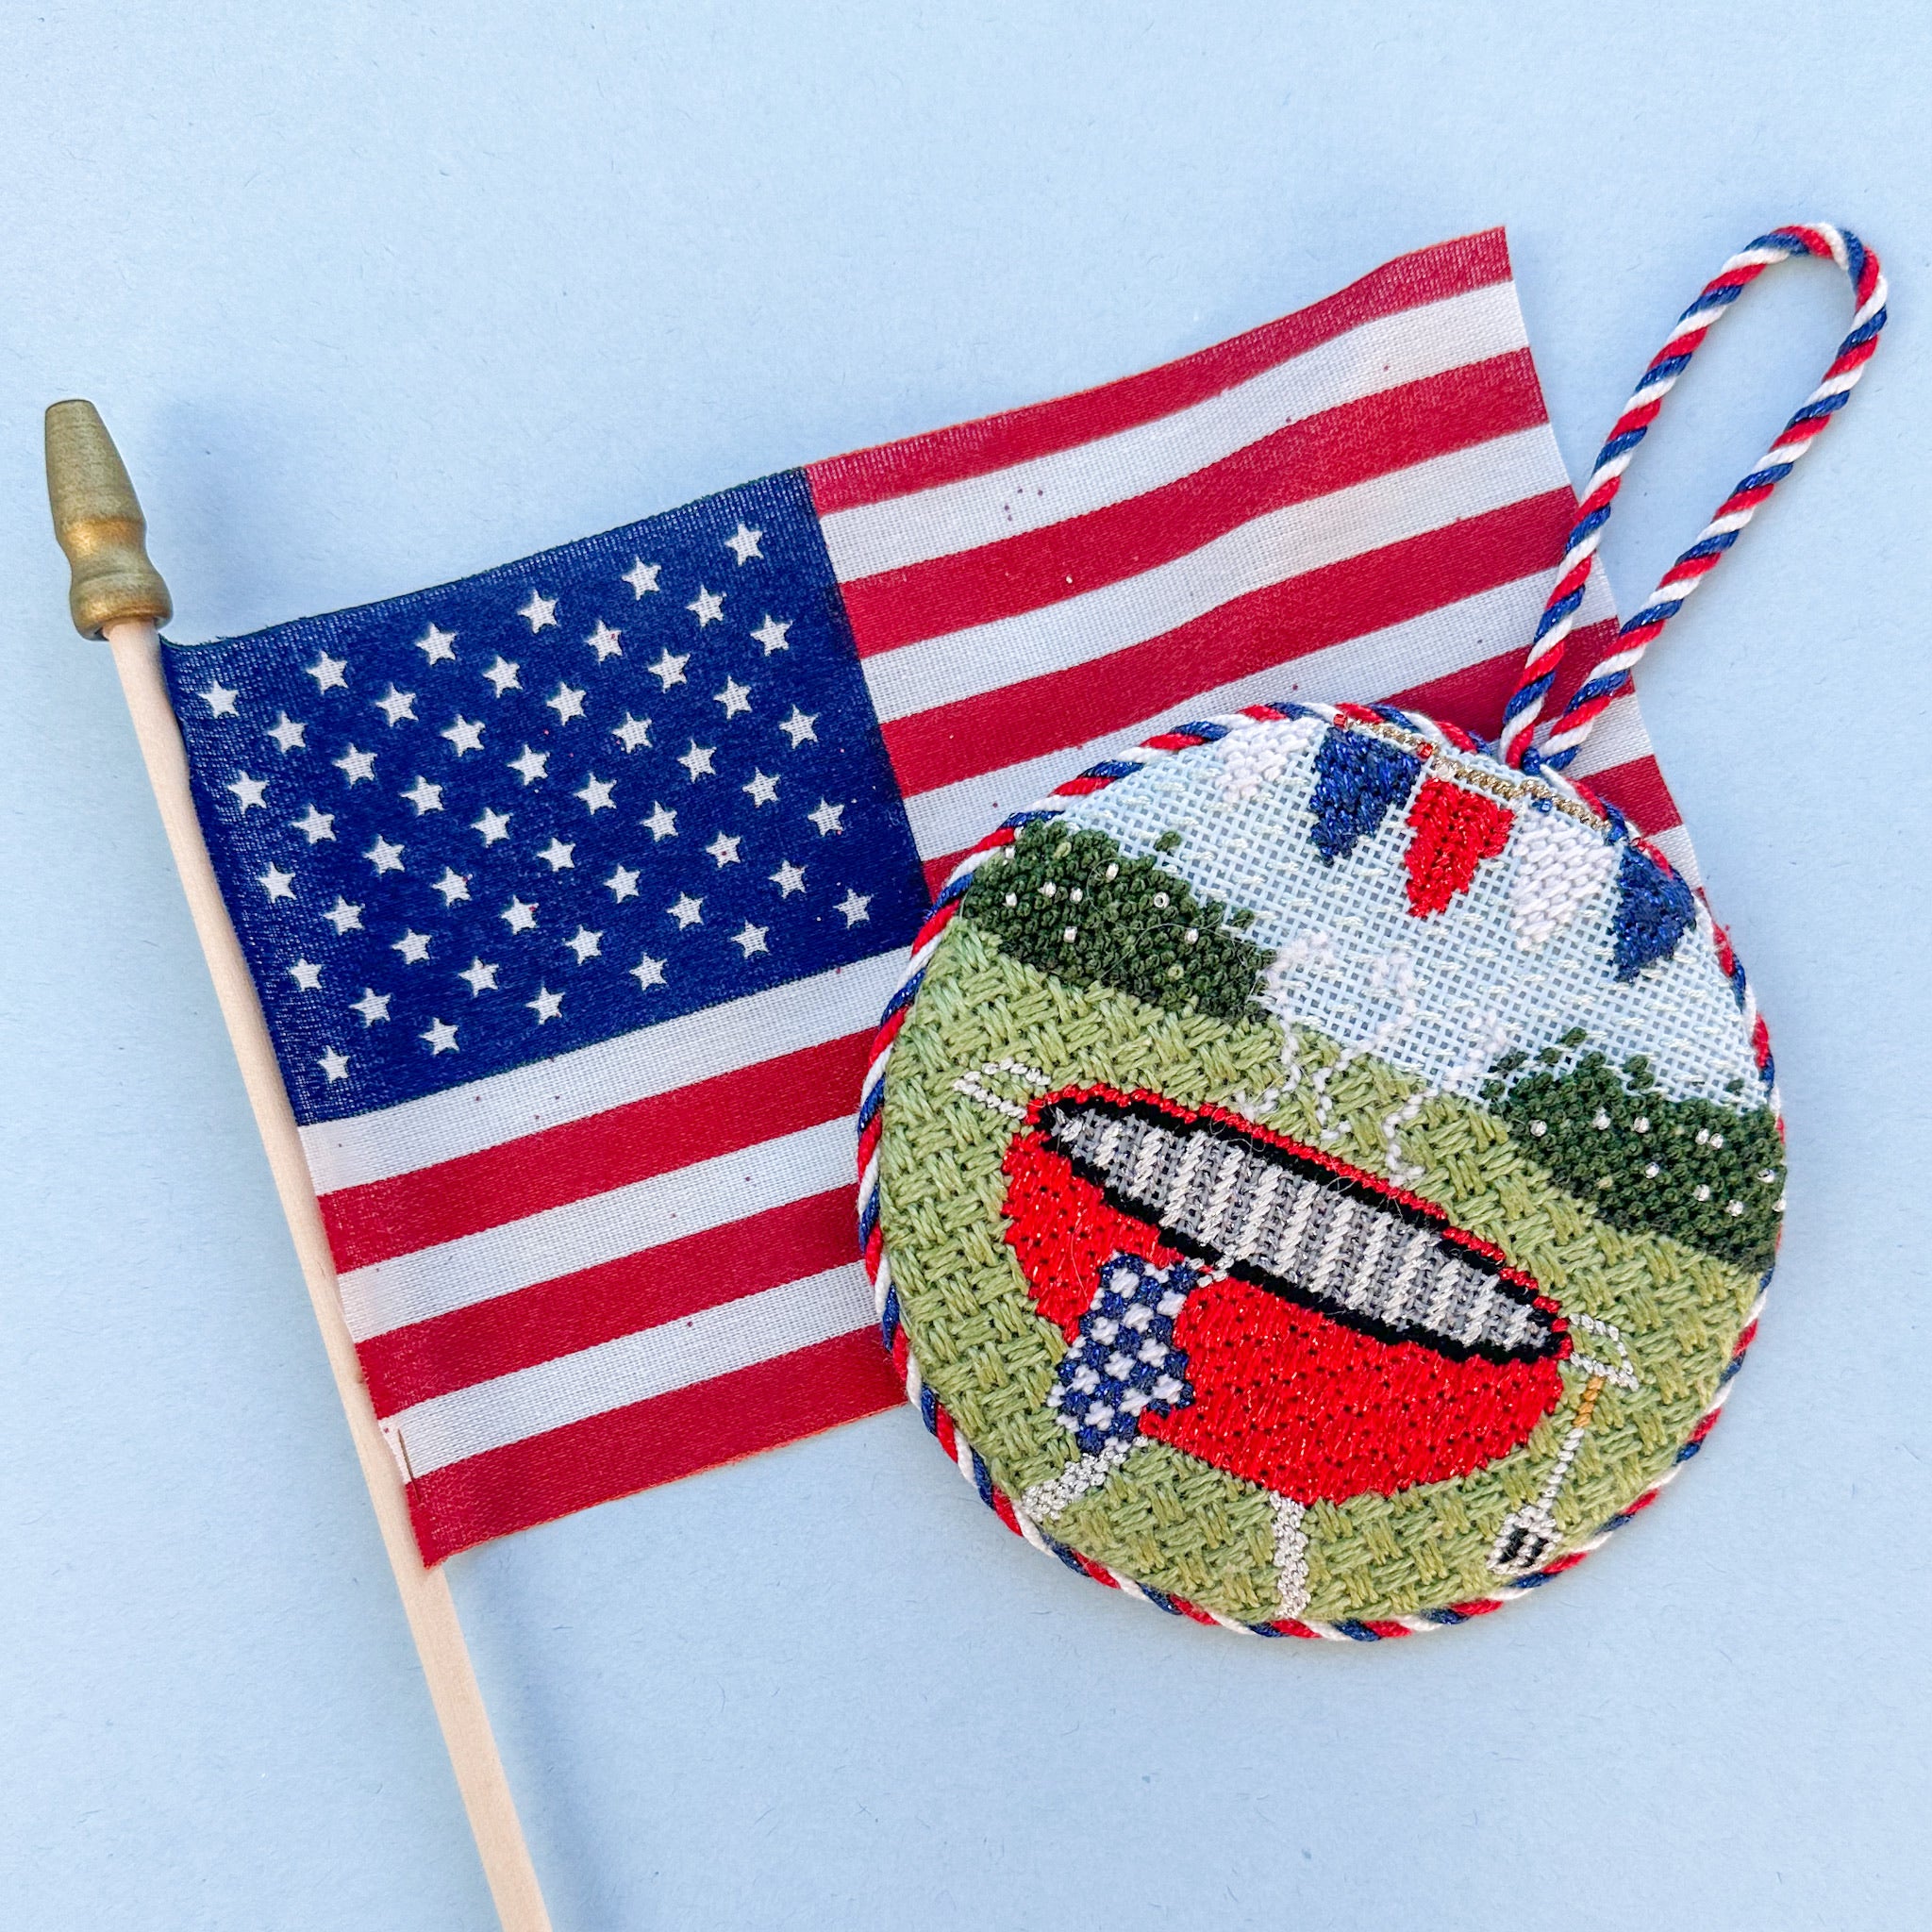 4th Of July Grill With Stitch Guide Needlepoint Canvas from Lycette  Designs. Needlepoint canvases, fibers, and finishing.